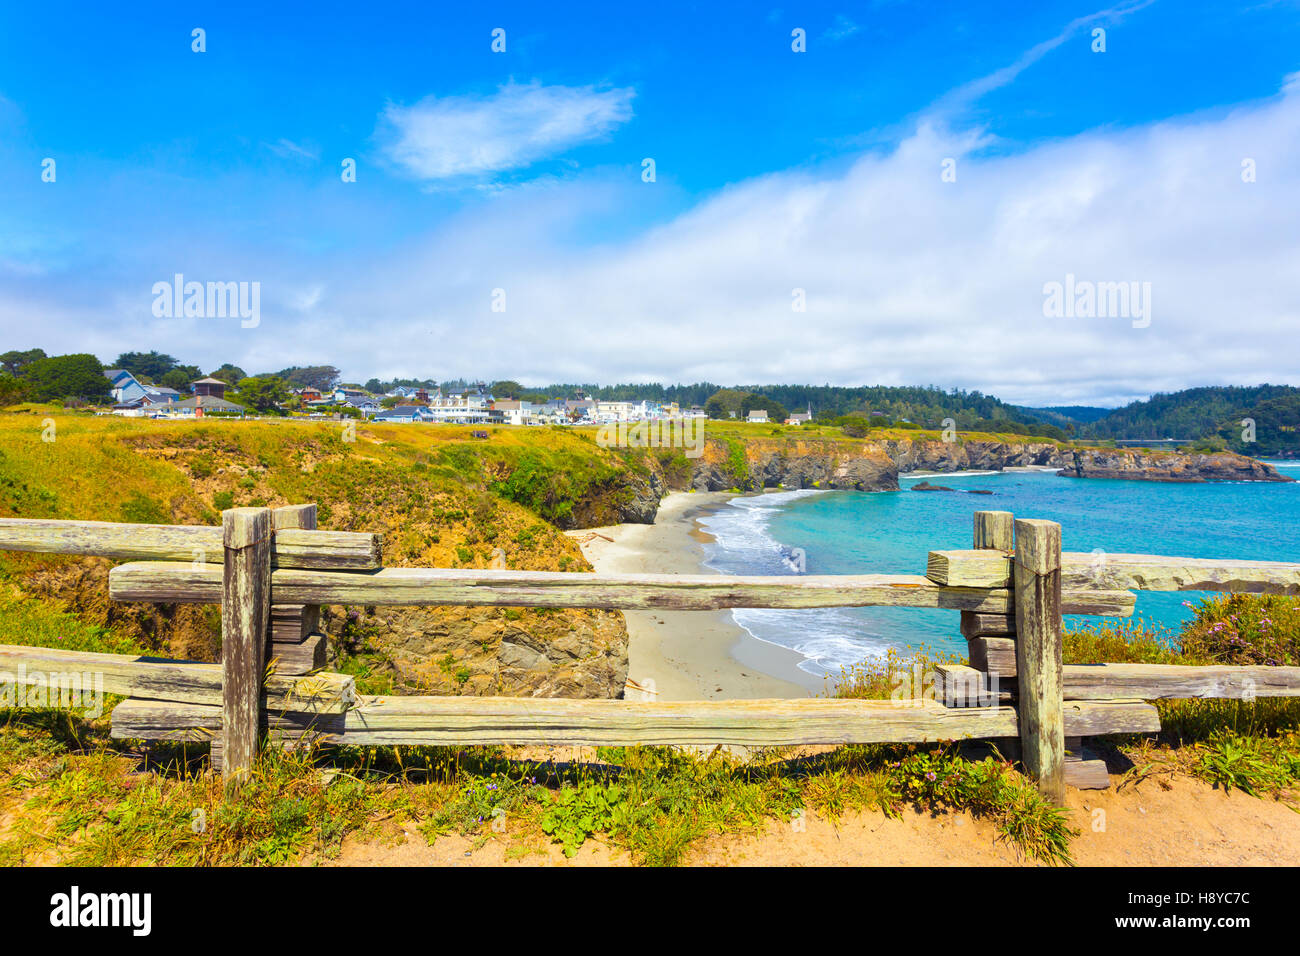 View through rustic wooden fence of sand beach below Main Street and houses of Mendocino town communinty on a sunny summer day Stock Photo